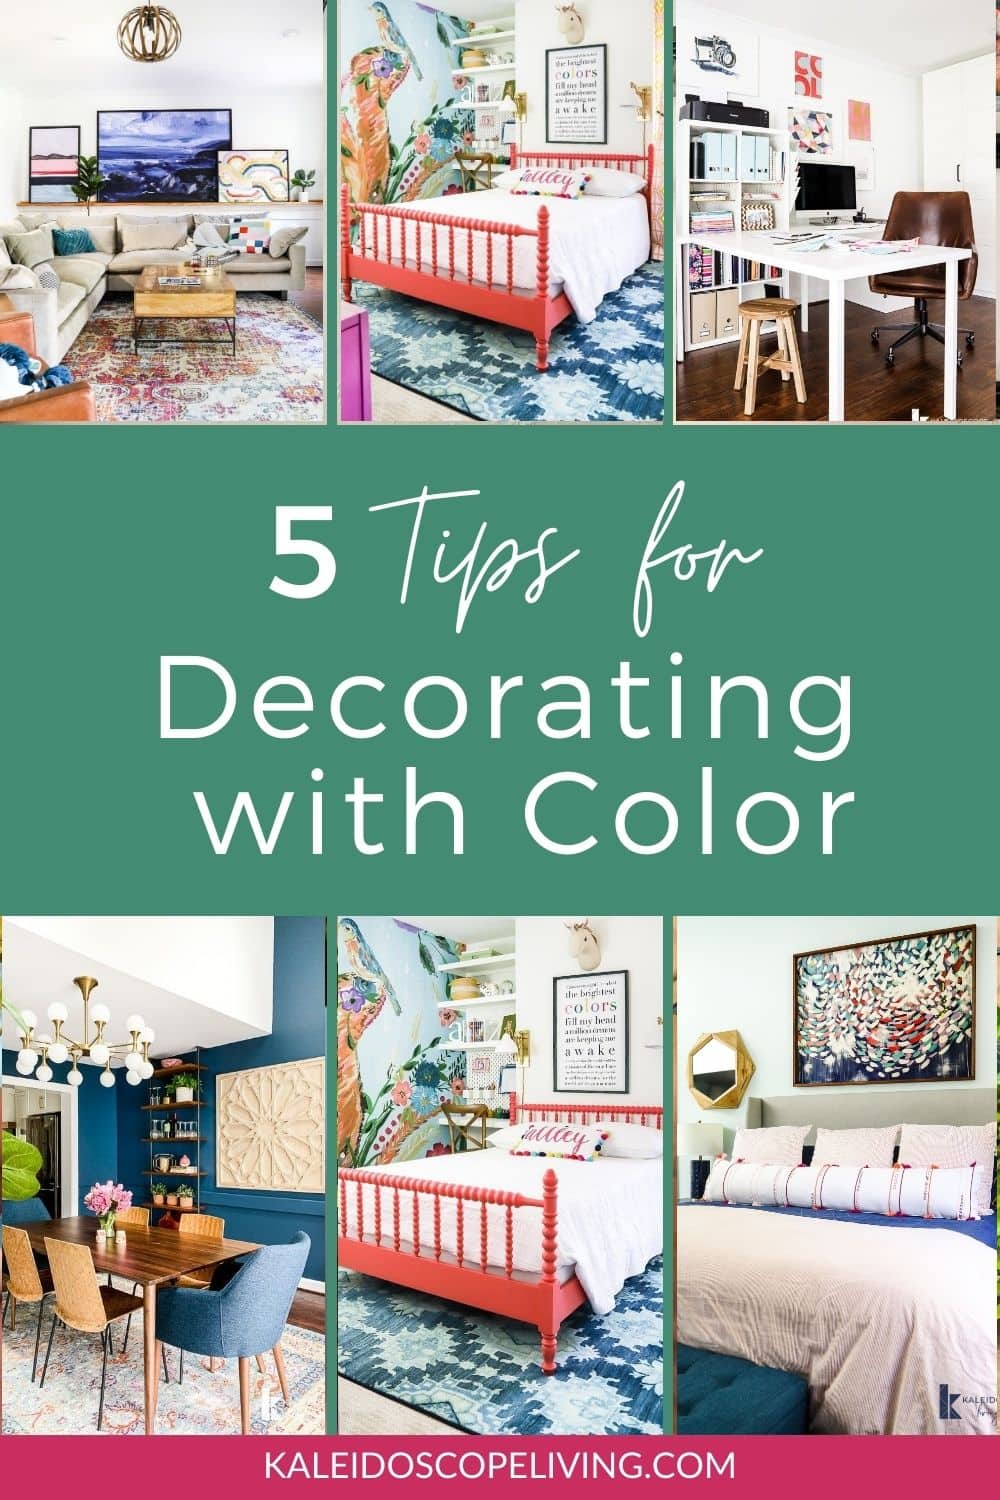 How to Decorate With Color Even When It Scares You | Kaleidoscope Living